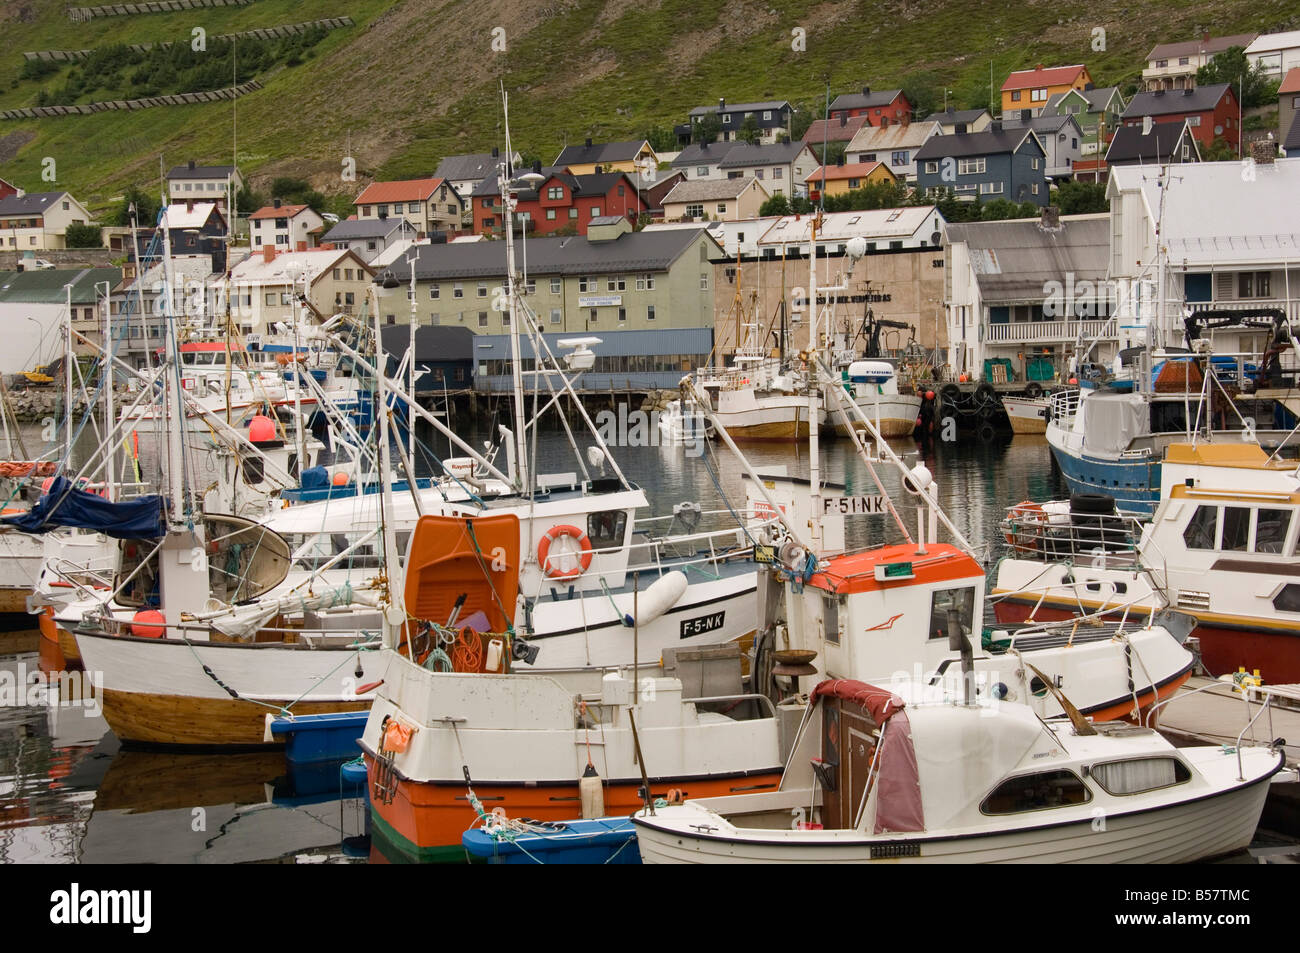 Fishing vessels and part of the small town of Honningsvaag, North Cape, Norway, Scandinavia, Europe Stock Photo